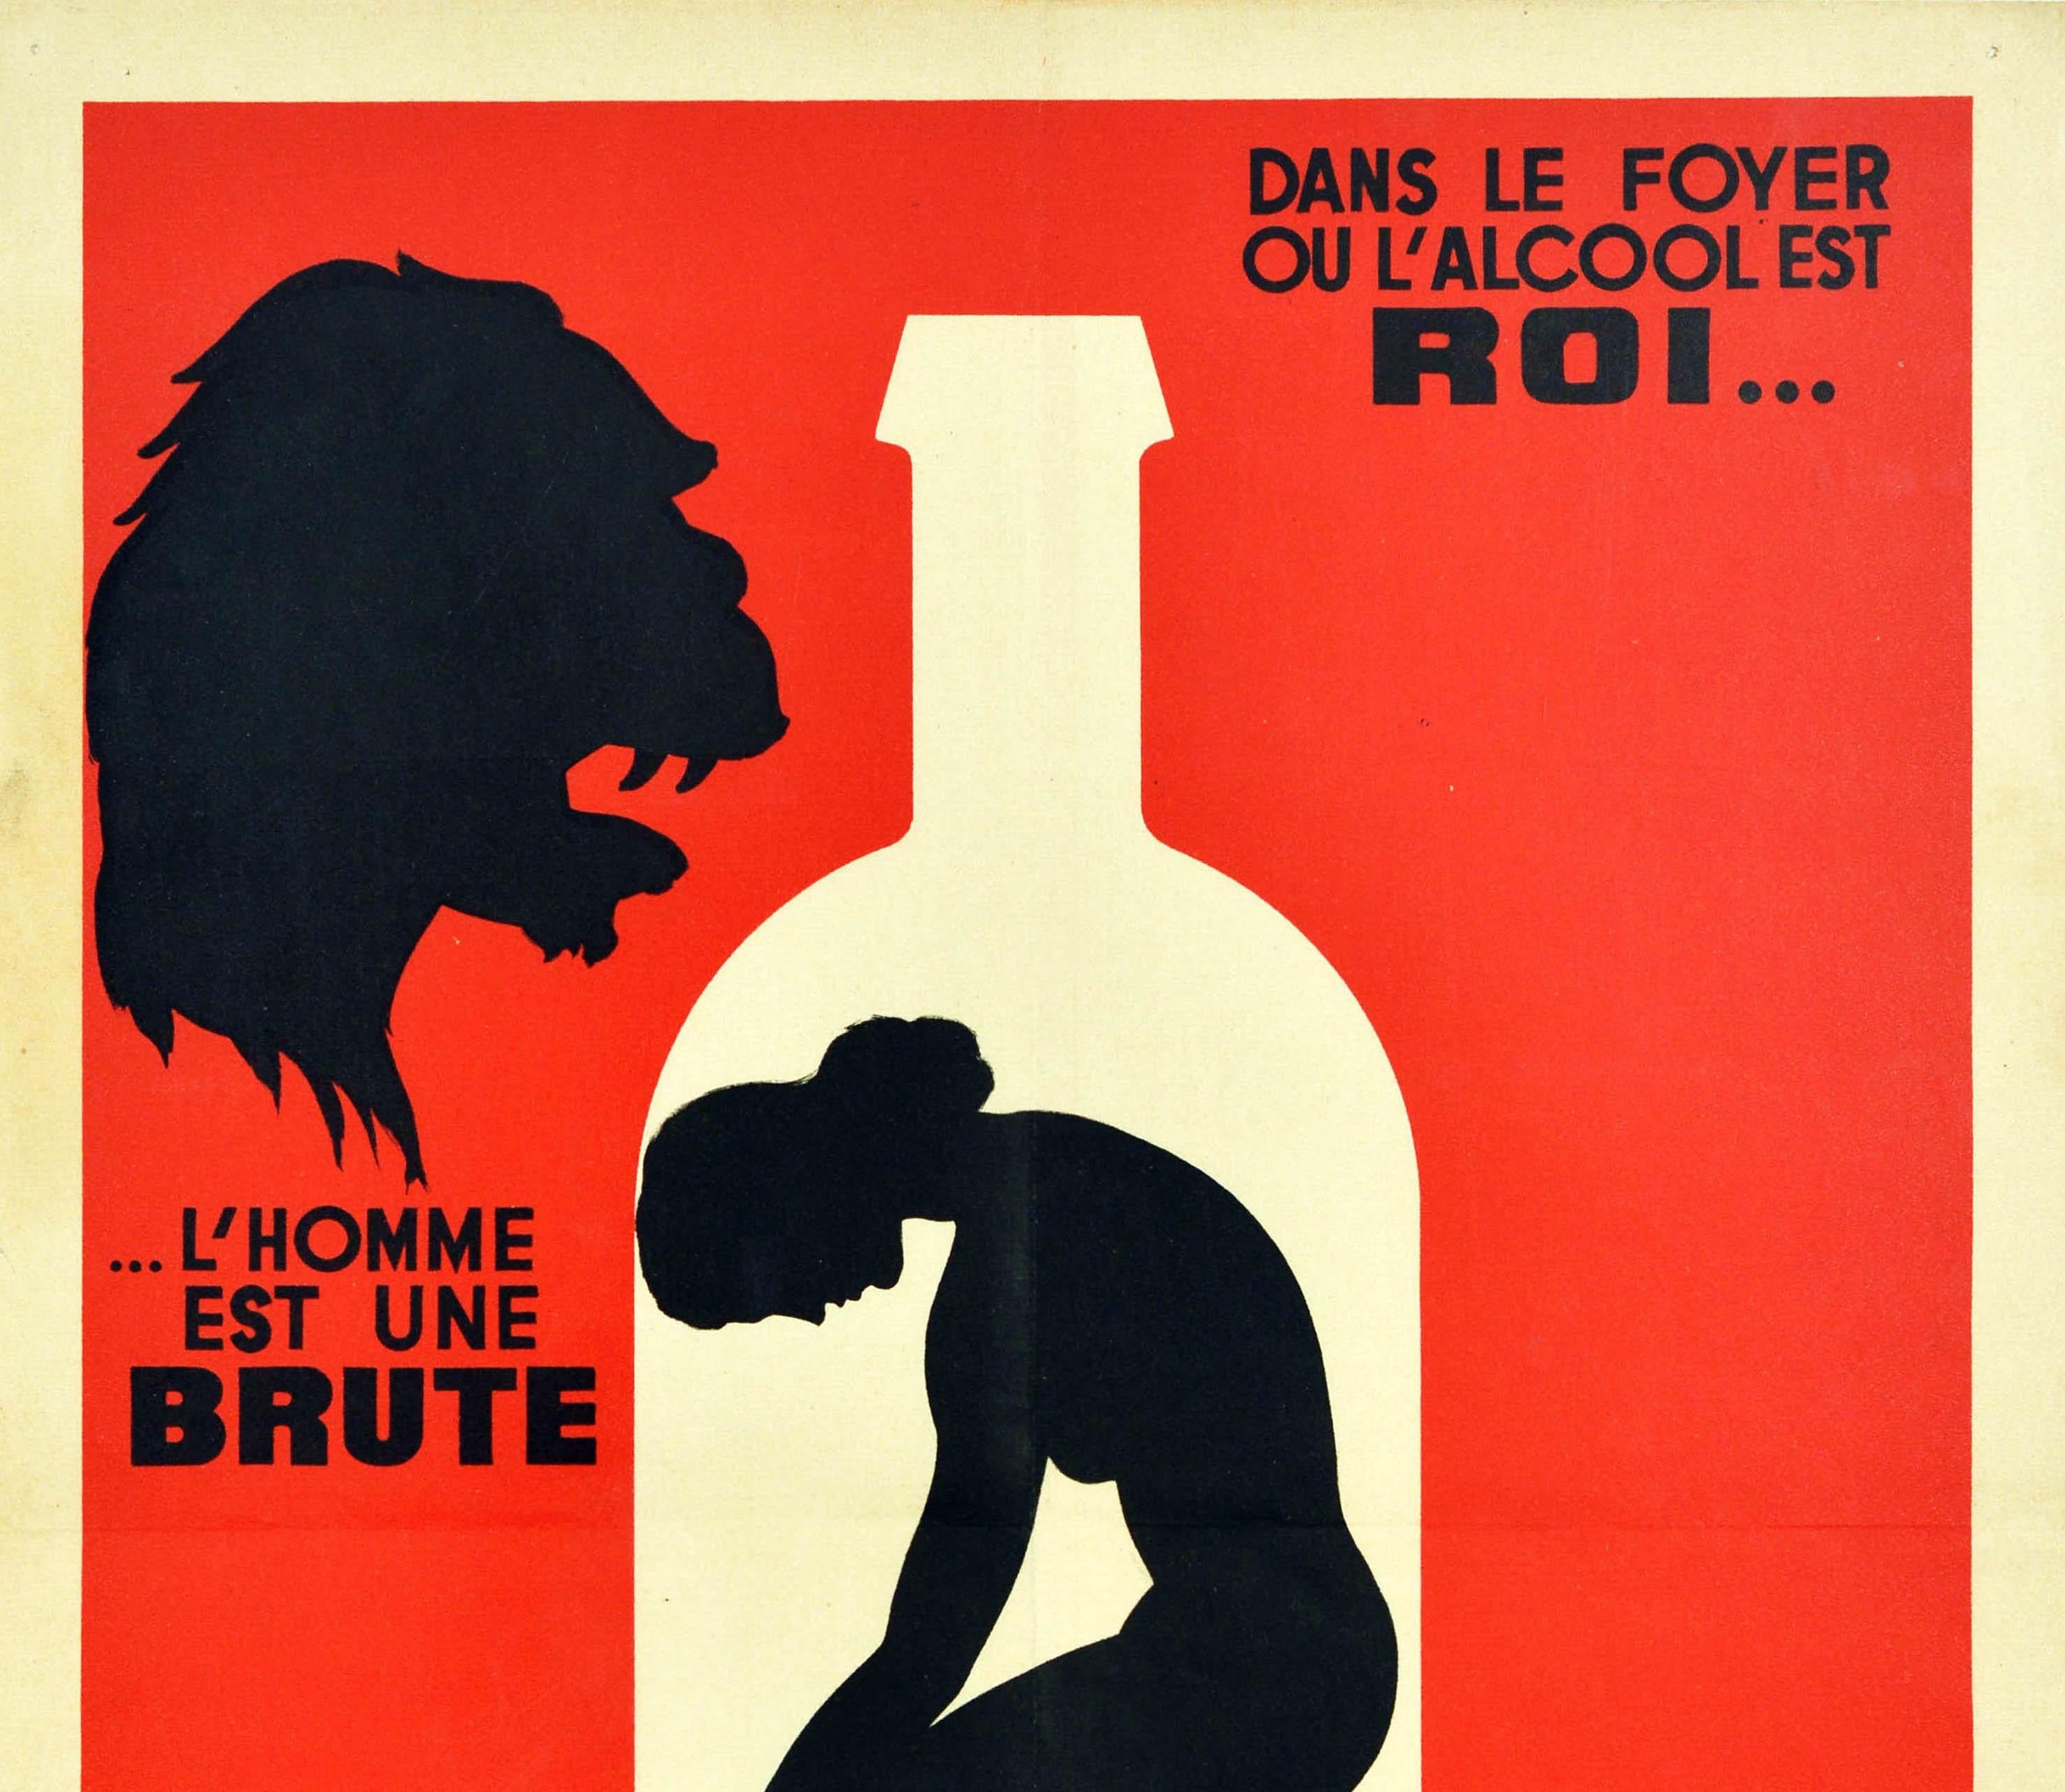 Original vintage anti drink public safety poster warning about dangers caused by alcohol - In the home where alcohol is king ... The man is a brute The woman a martyr The children are the victims / Dans le foyer ou l'alcool est roi ... L'Homme est